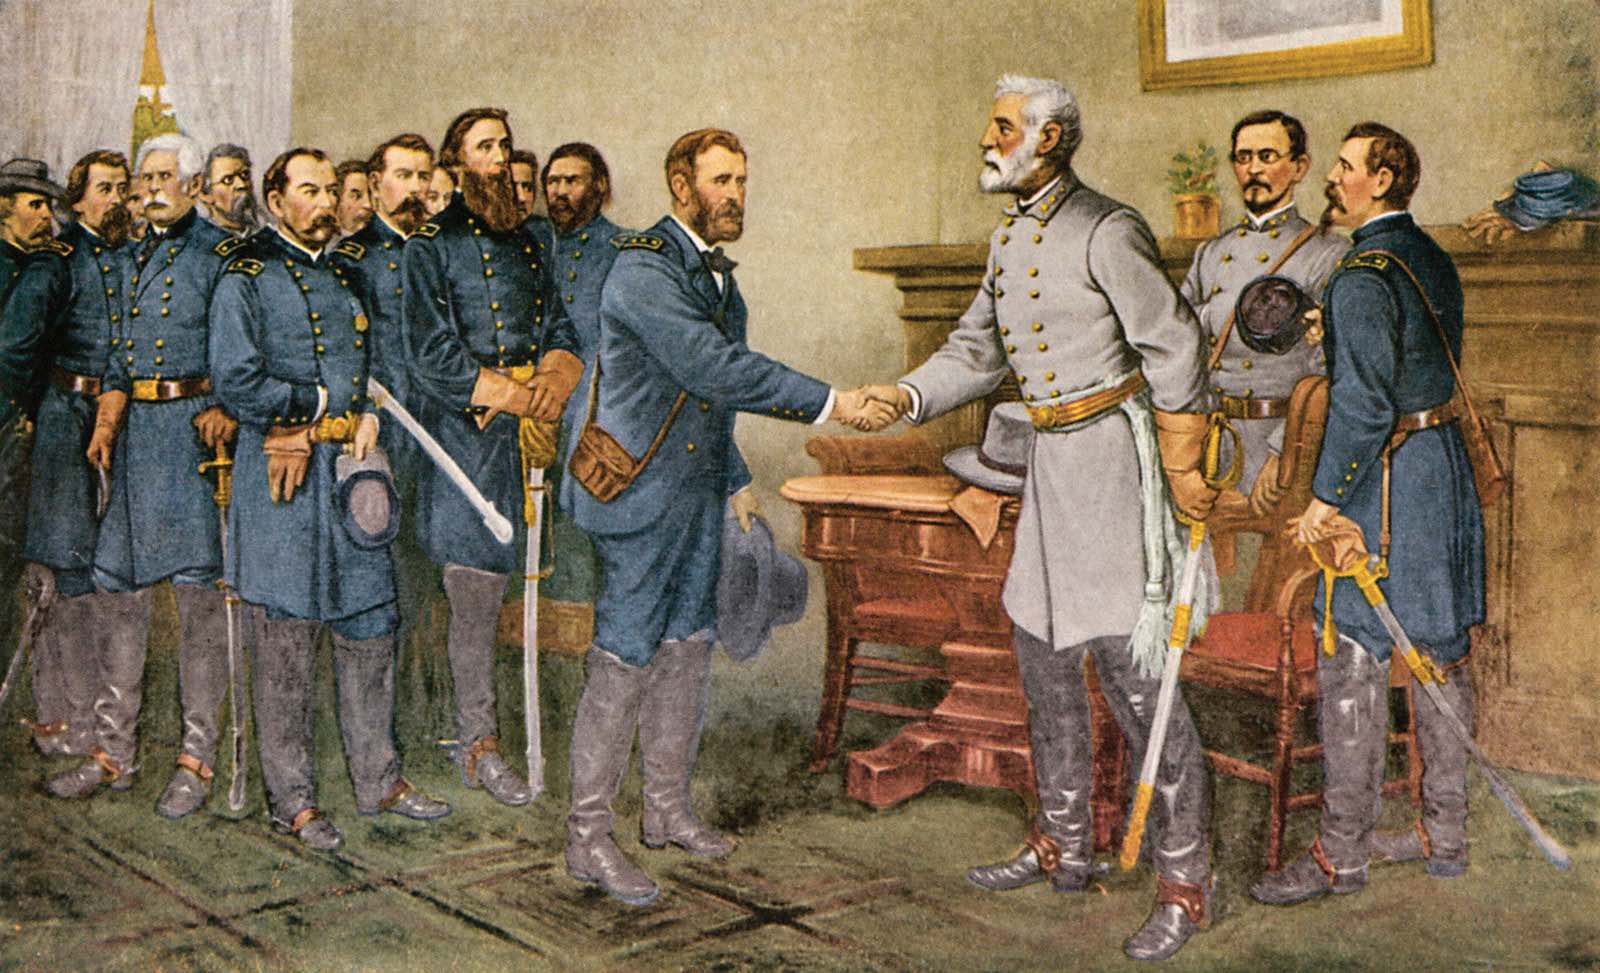 An oil painting depicting the surrender of the Confederacy at Appomattox. The painting shows a roomful of men in 19th-century American military uniforms, both blue and gray, while two men shake hands.